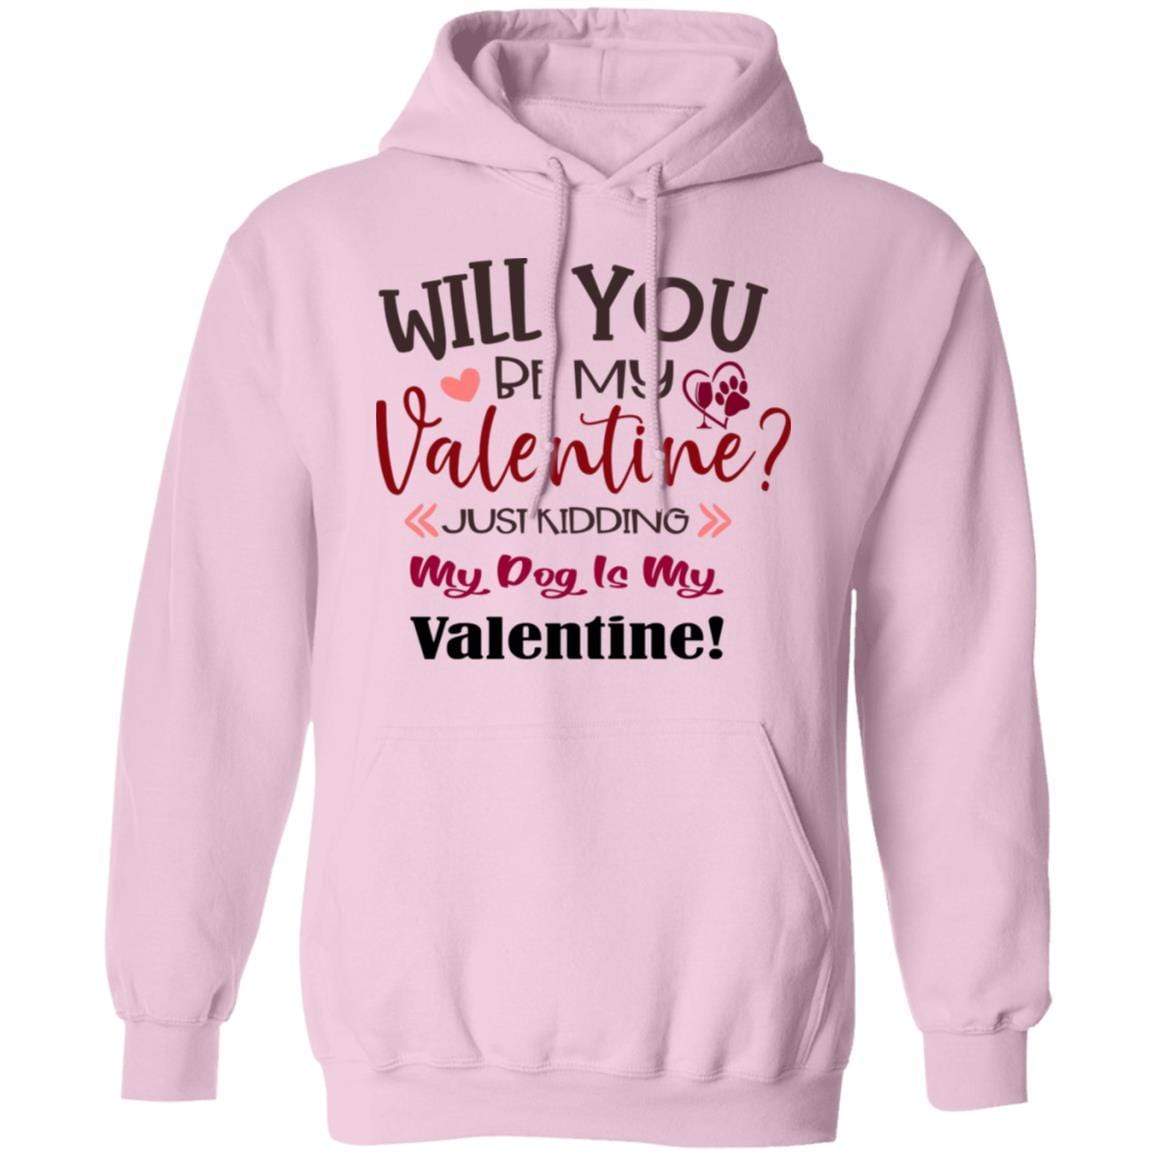 Sweatshirts Light Pink / S Winey Bitches Co "Will You Be My Valentine" Pullover Hoodie 8 oz. WineyBitchesCo